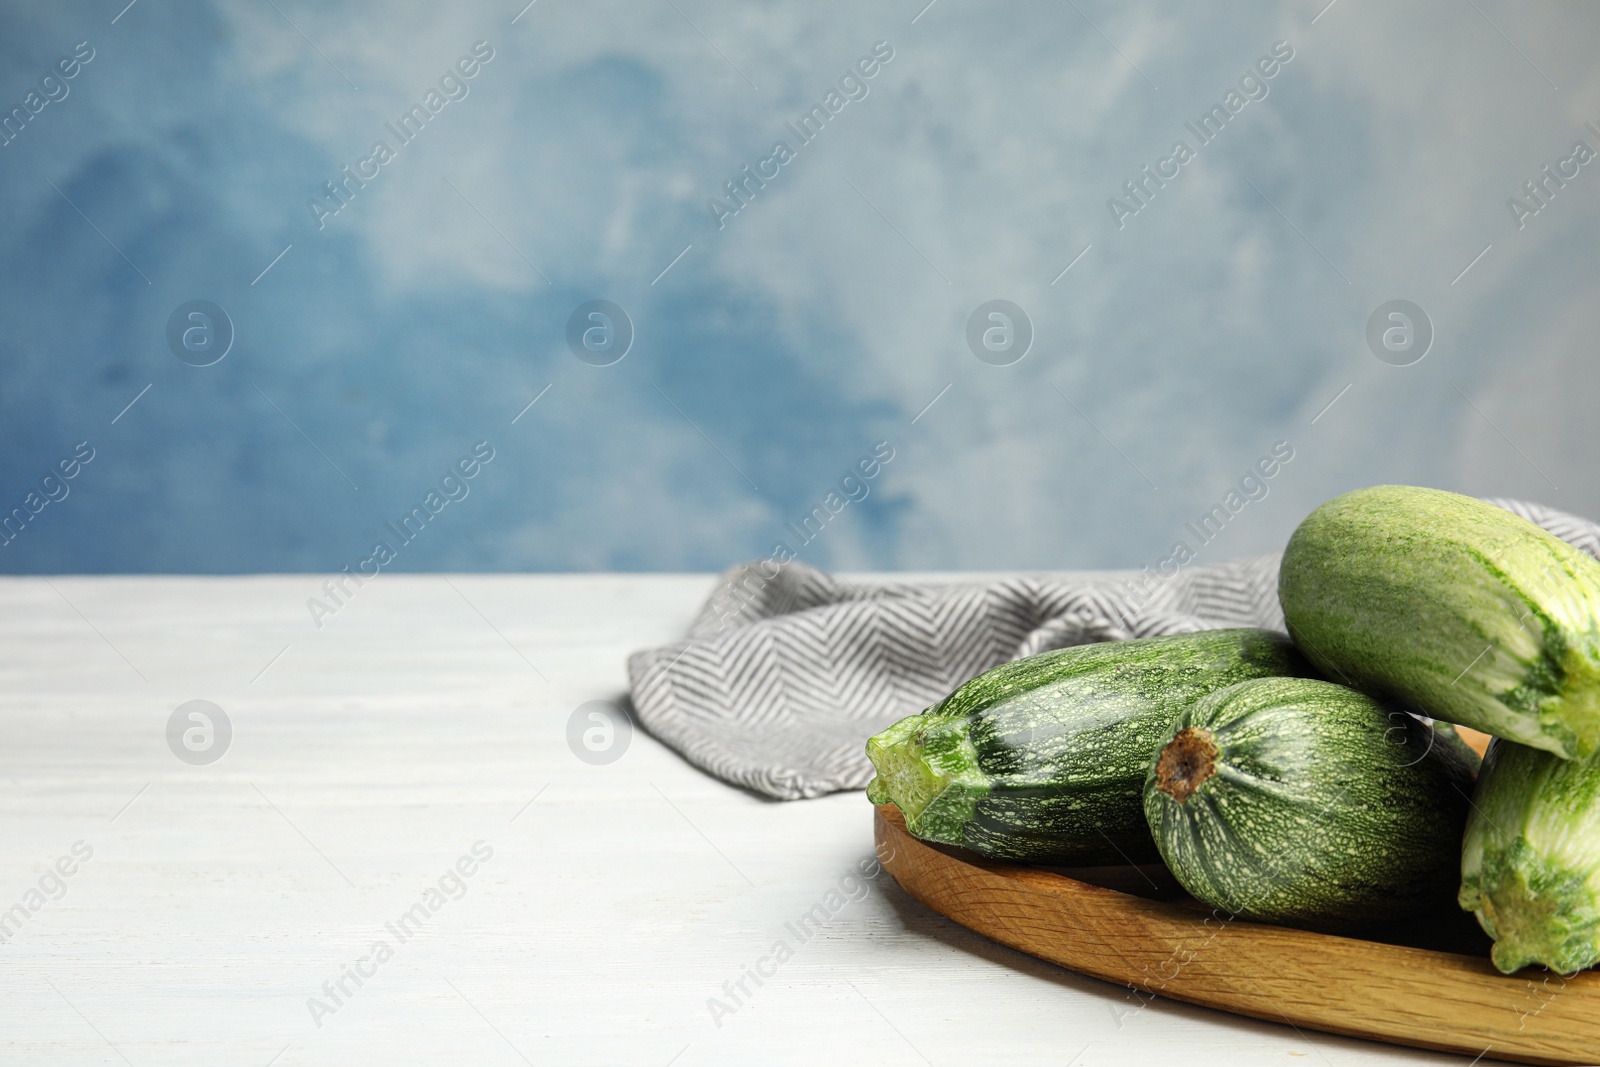 Photo of Wooden plate with fresh ripe green zucchinis on white table against blue background, space for text